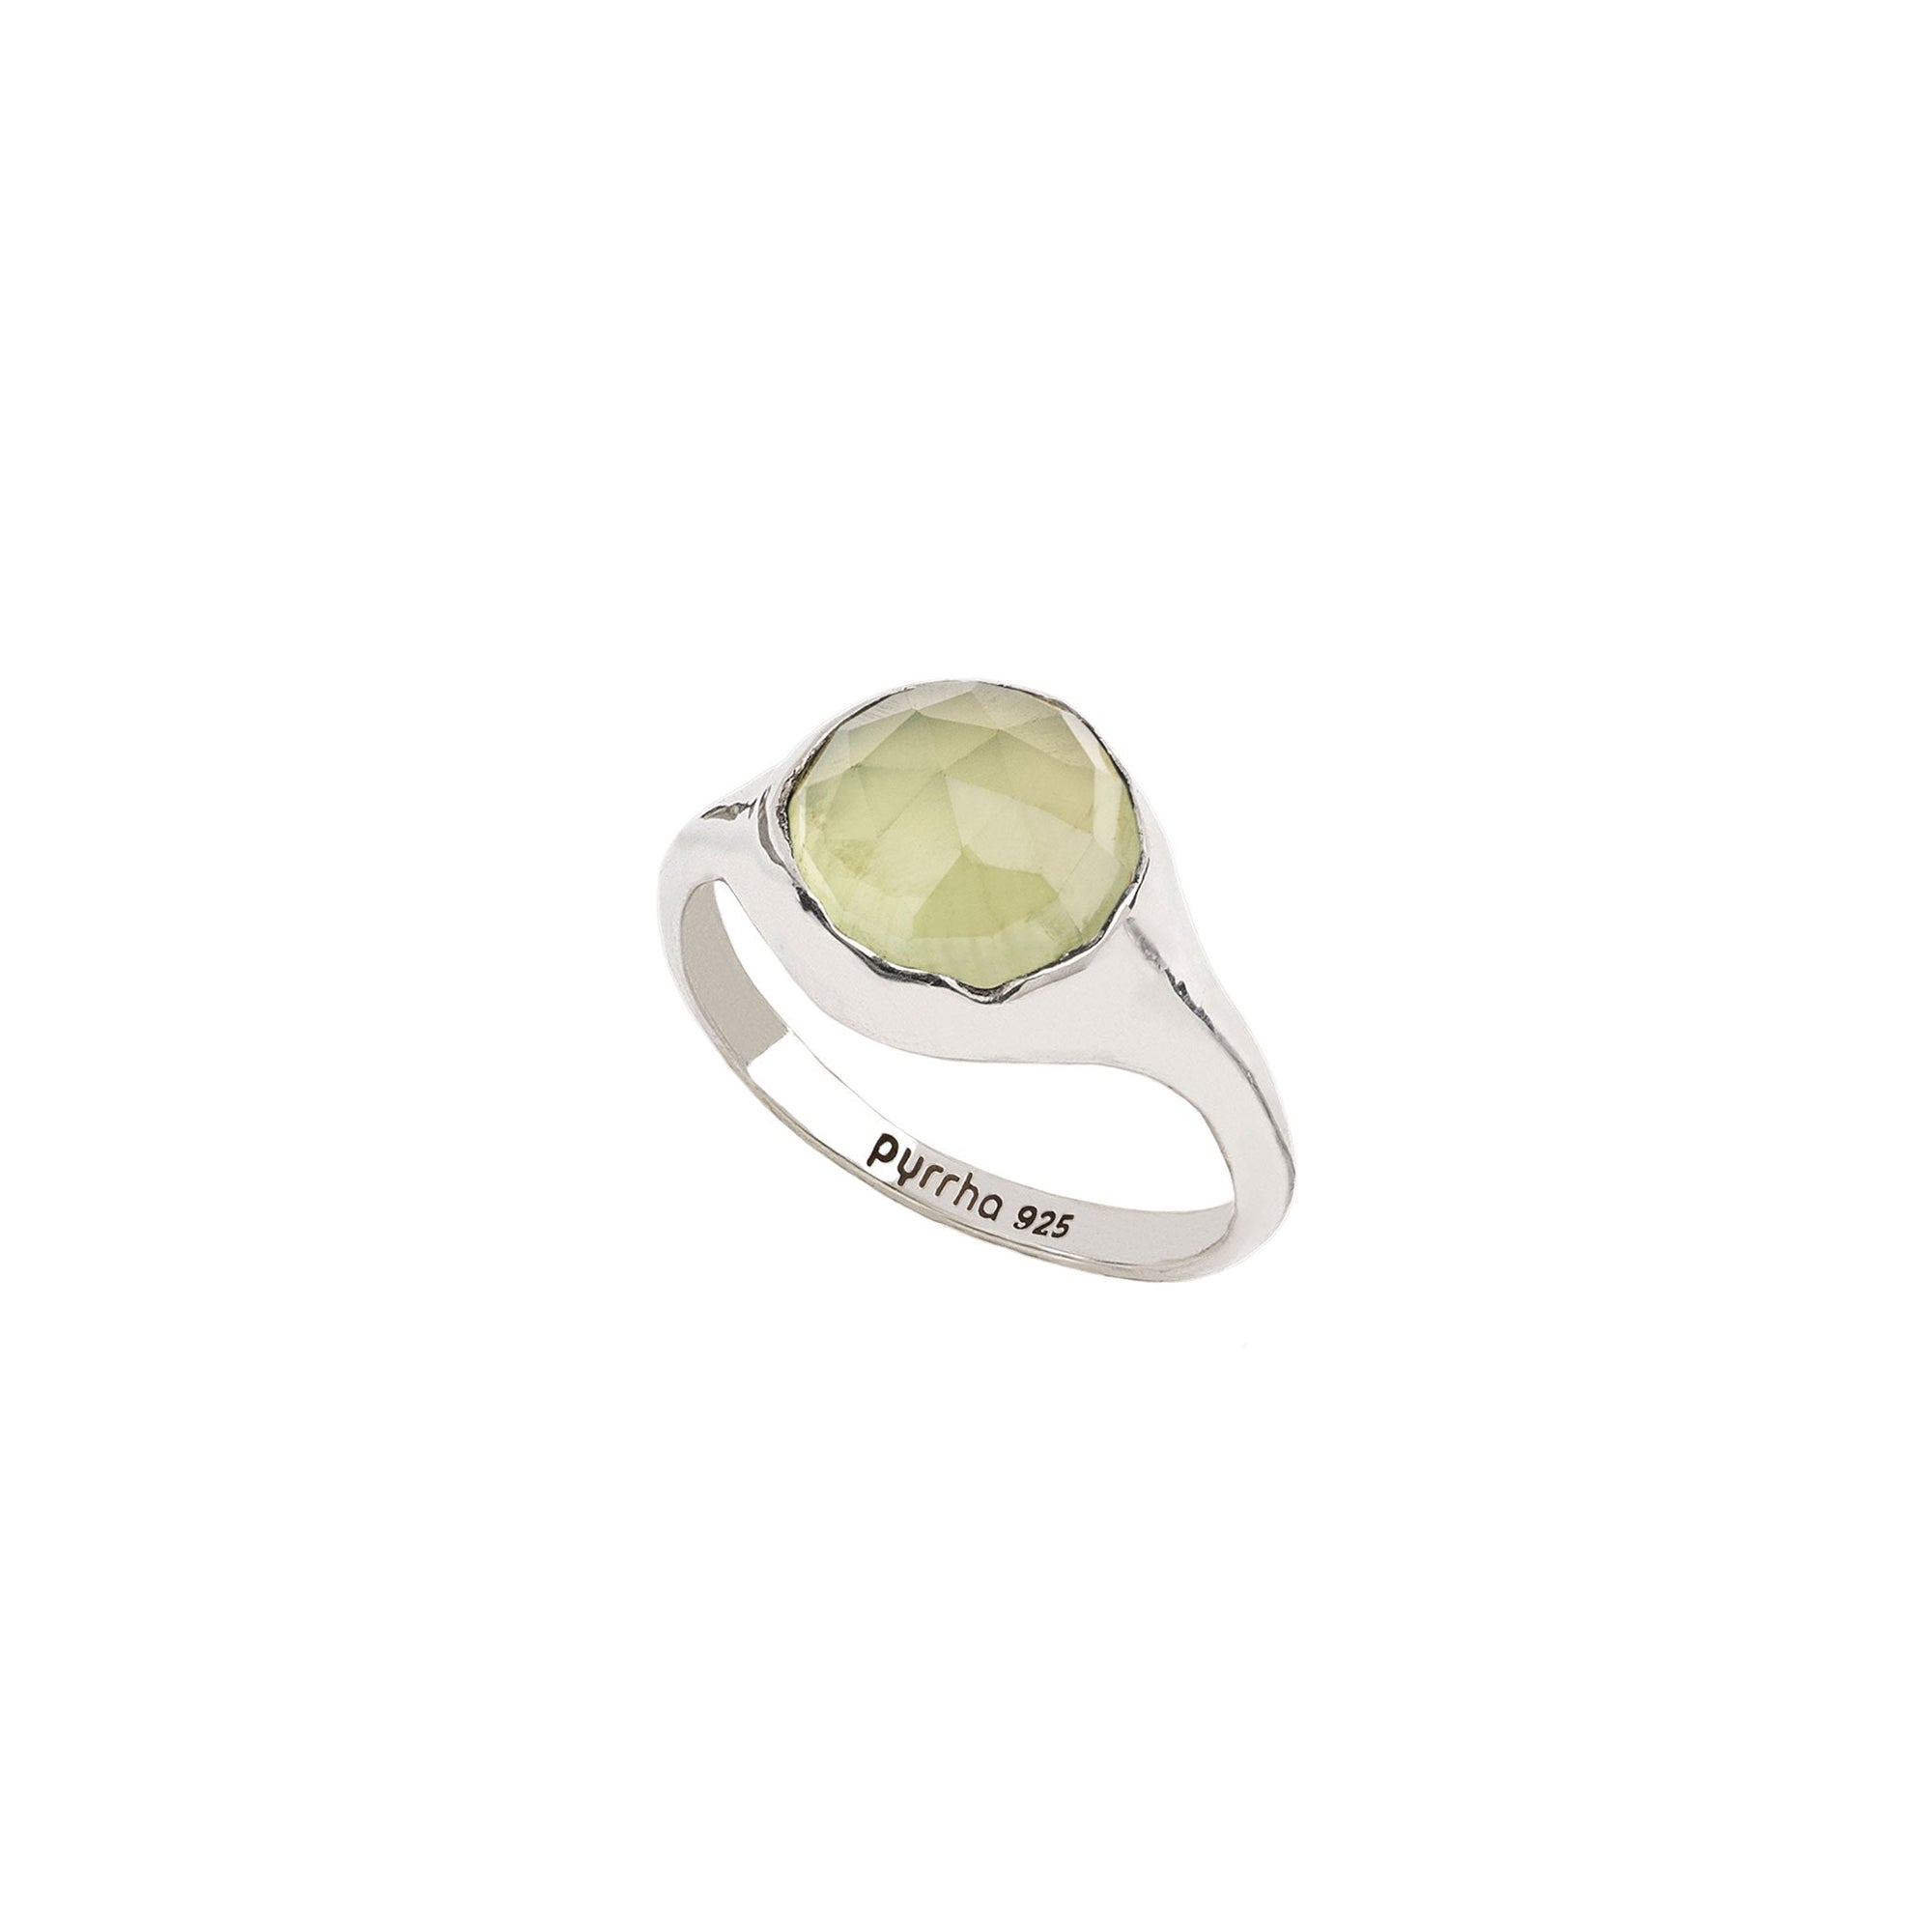 Prehnite Large Faceted Stone Set Signet Ring